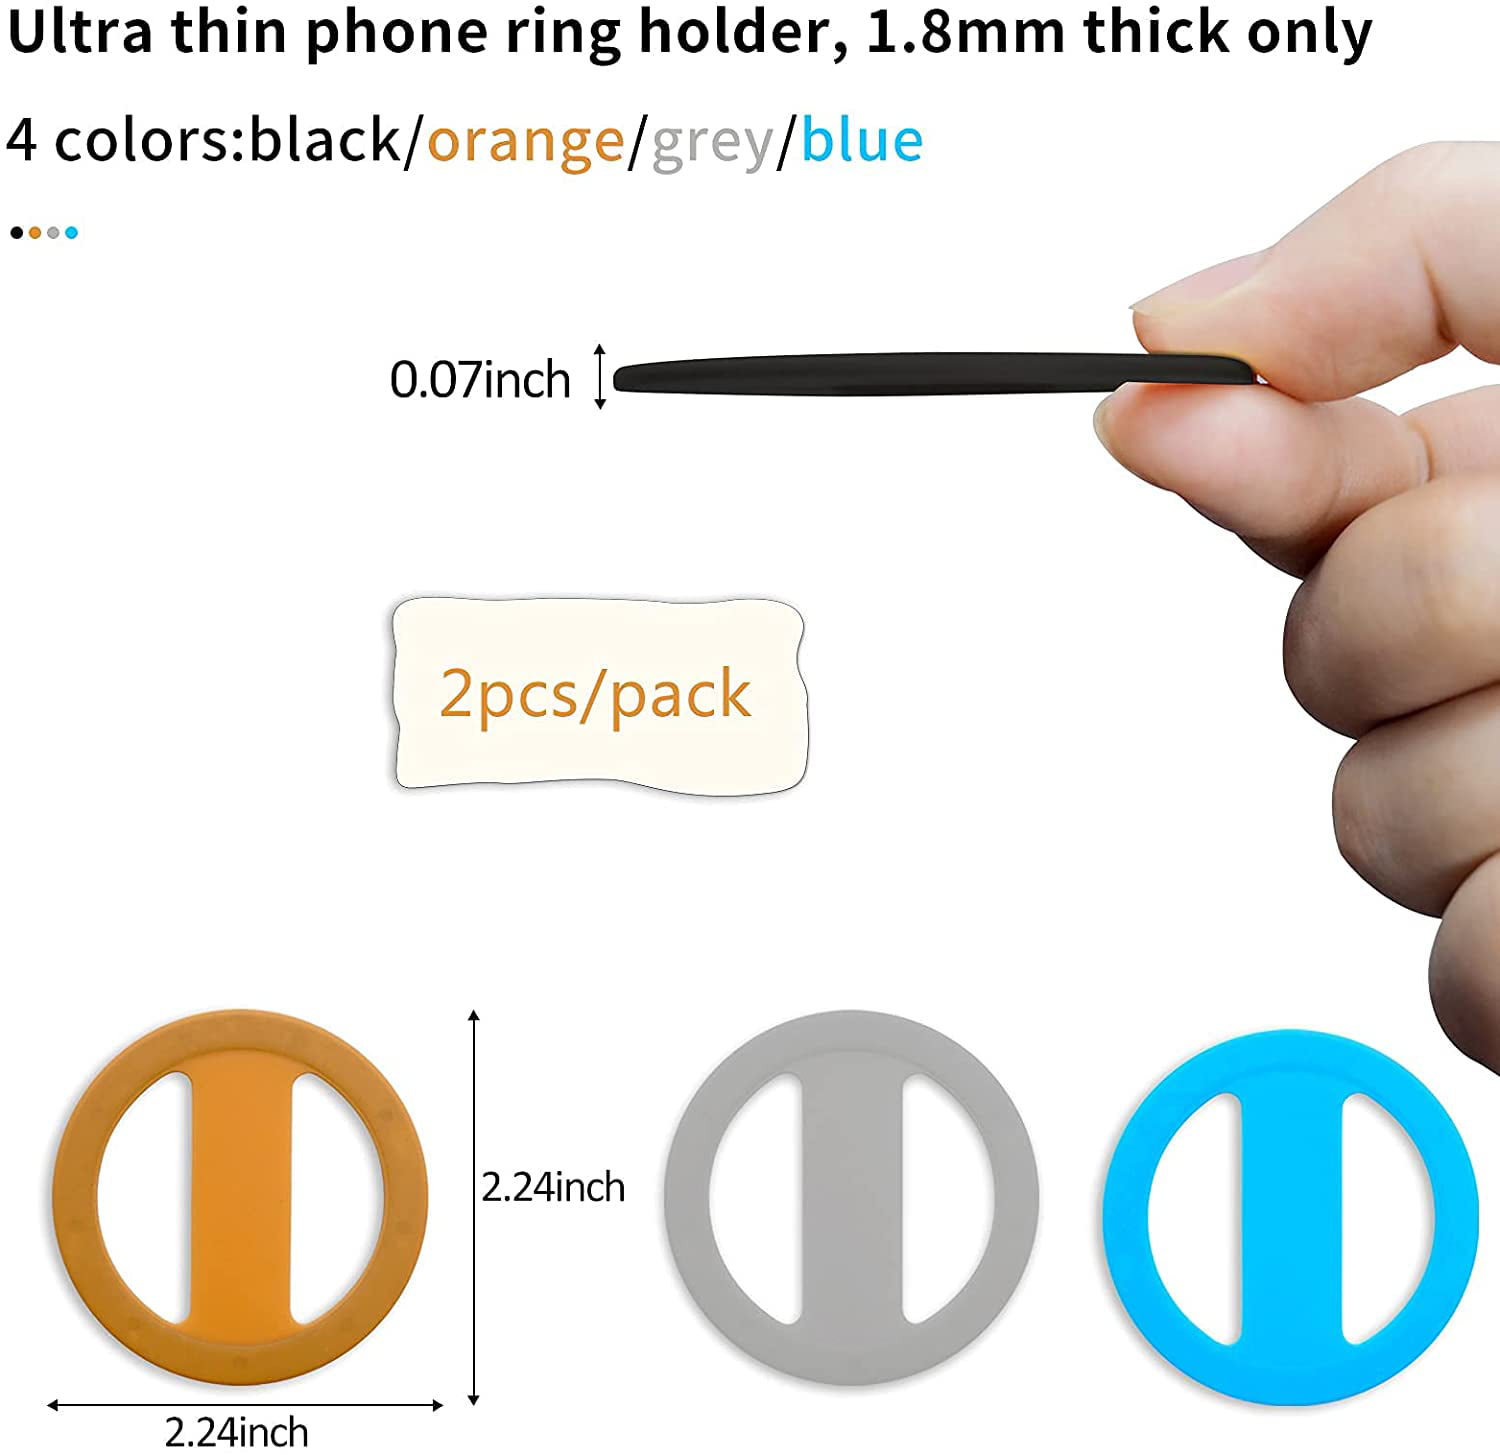 Yingmore Phone Grip Samsung Android Smartphones Elastic Silicone Cell Phone Strap Ring Holder Mobile Phone Finger Loop for Hand Compatible with iPhone 2pcs Black/Orange 